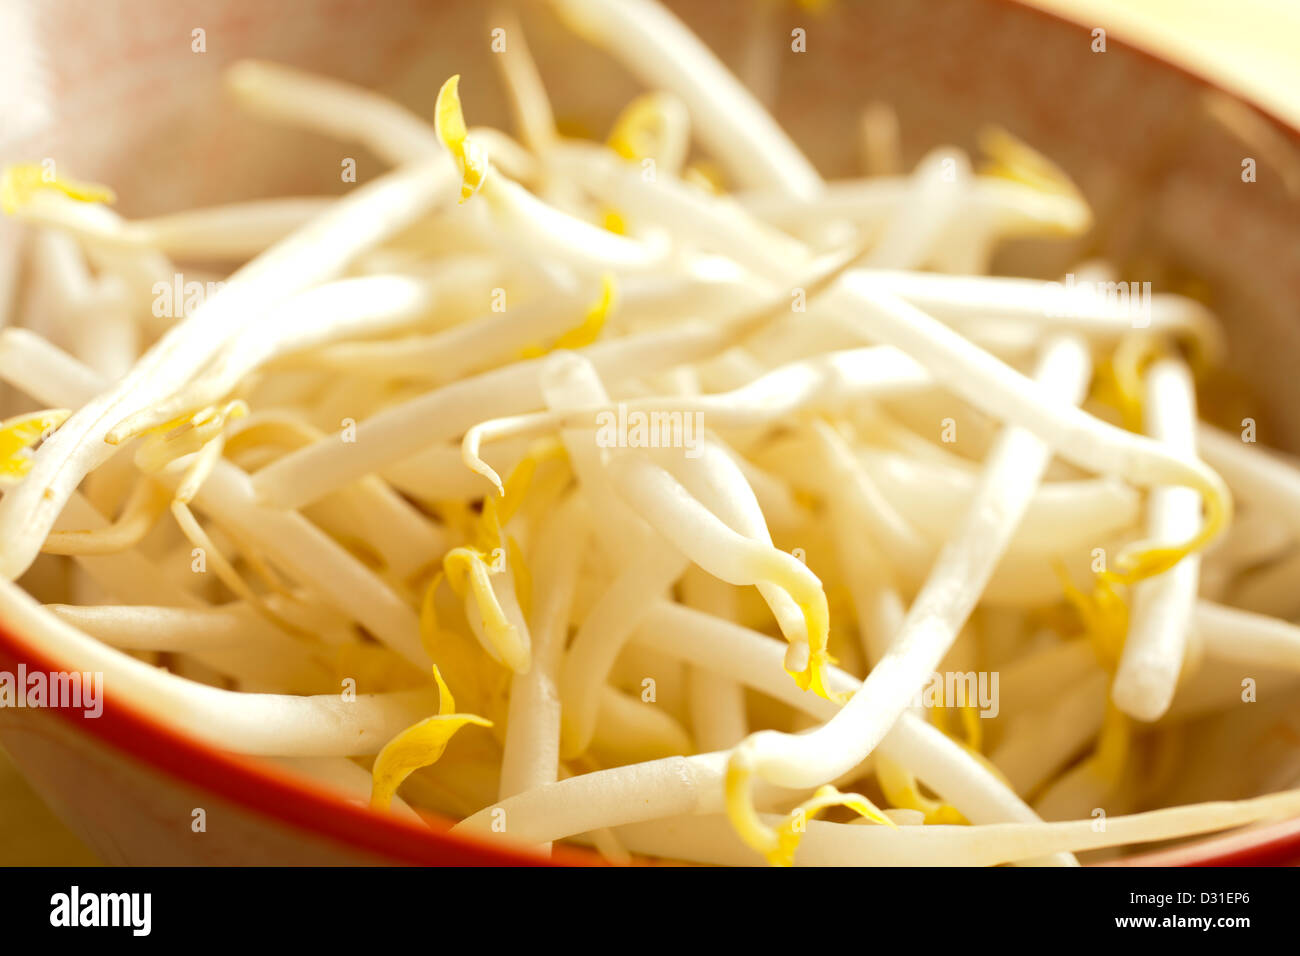 Mung bean sprouts Stock Photo